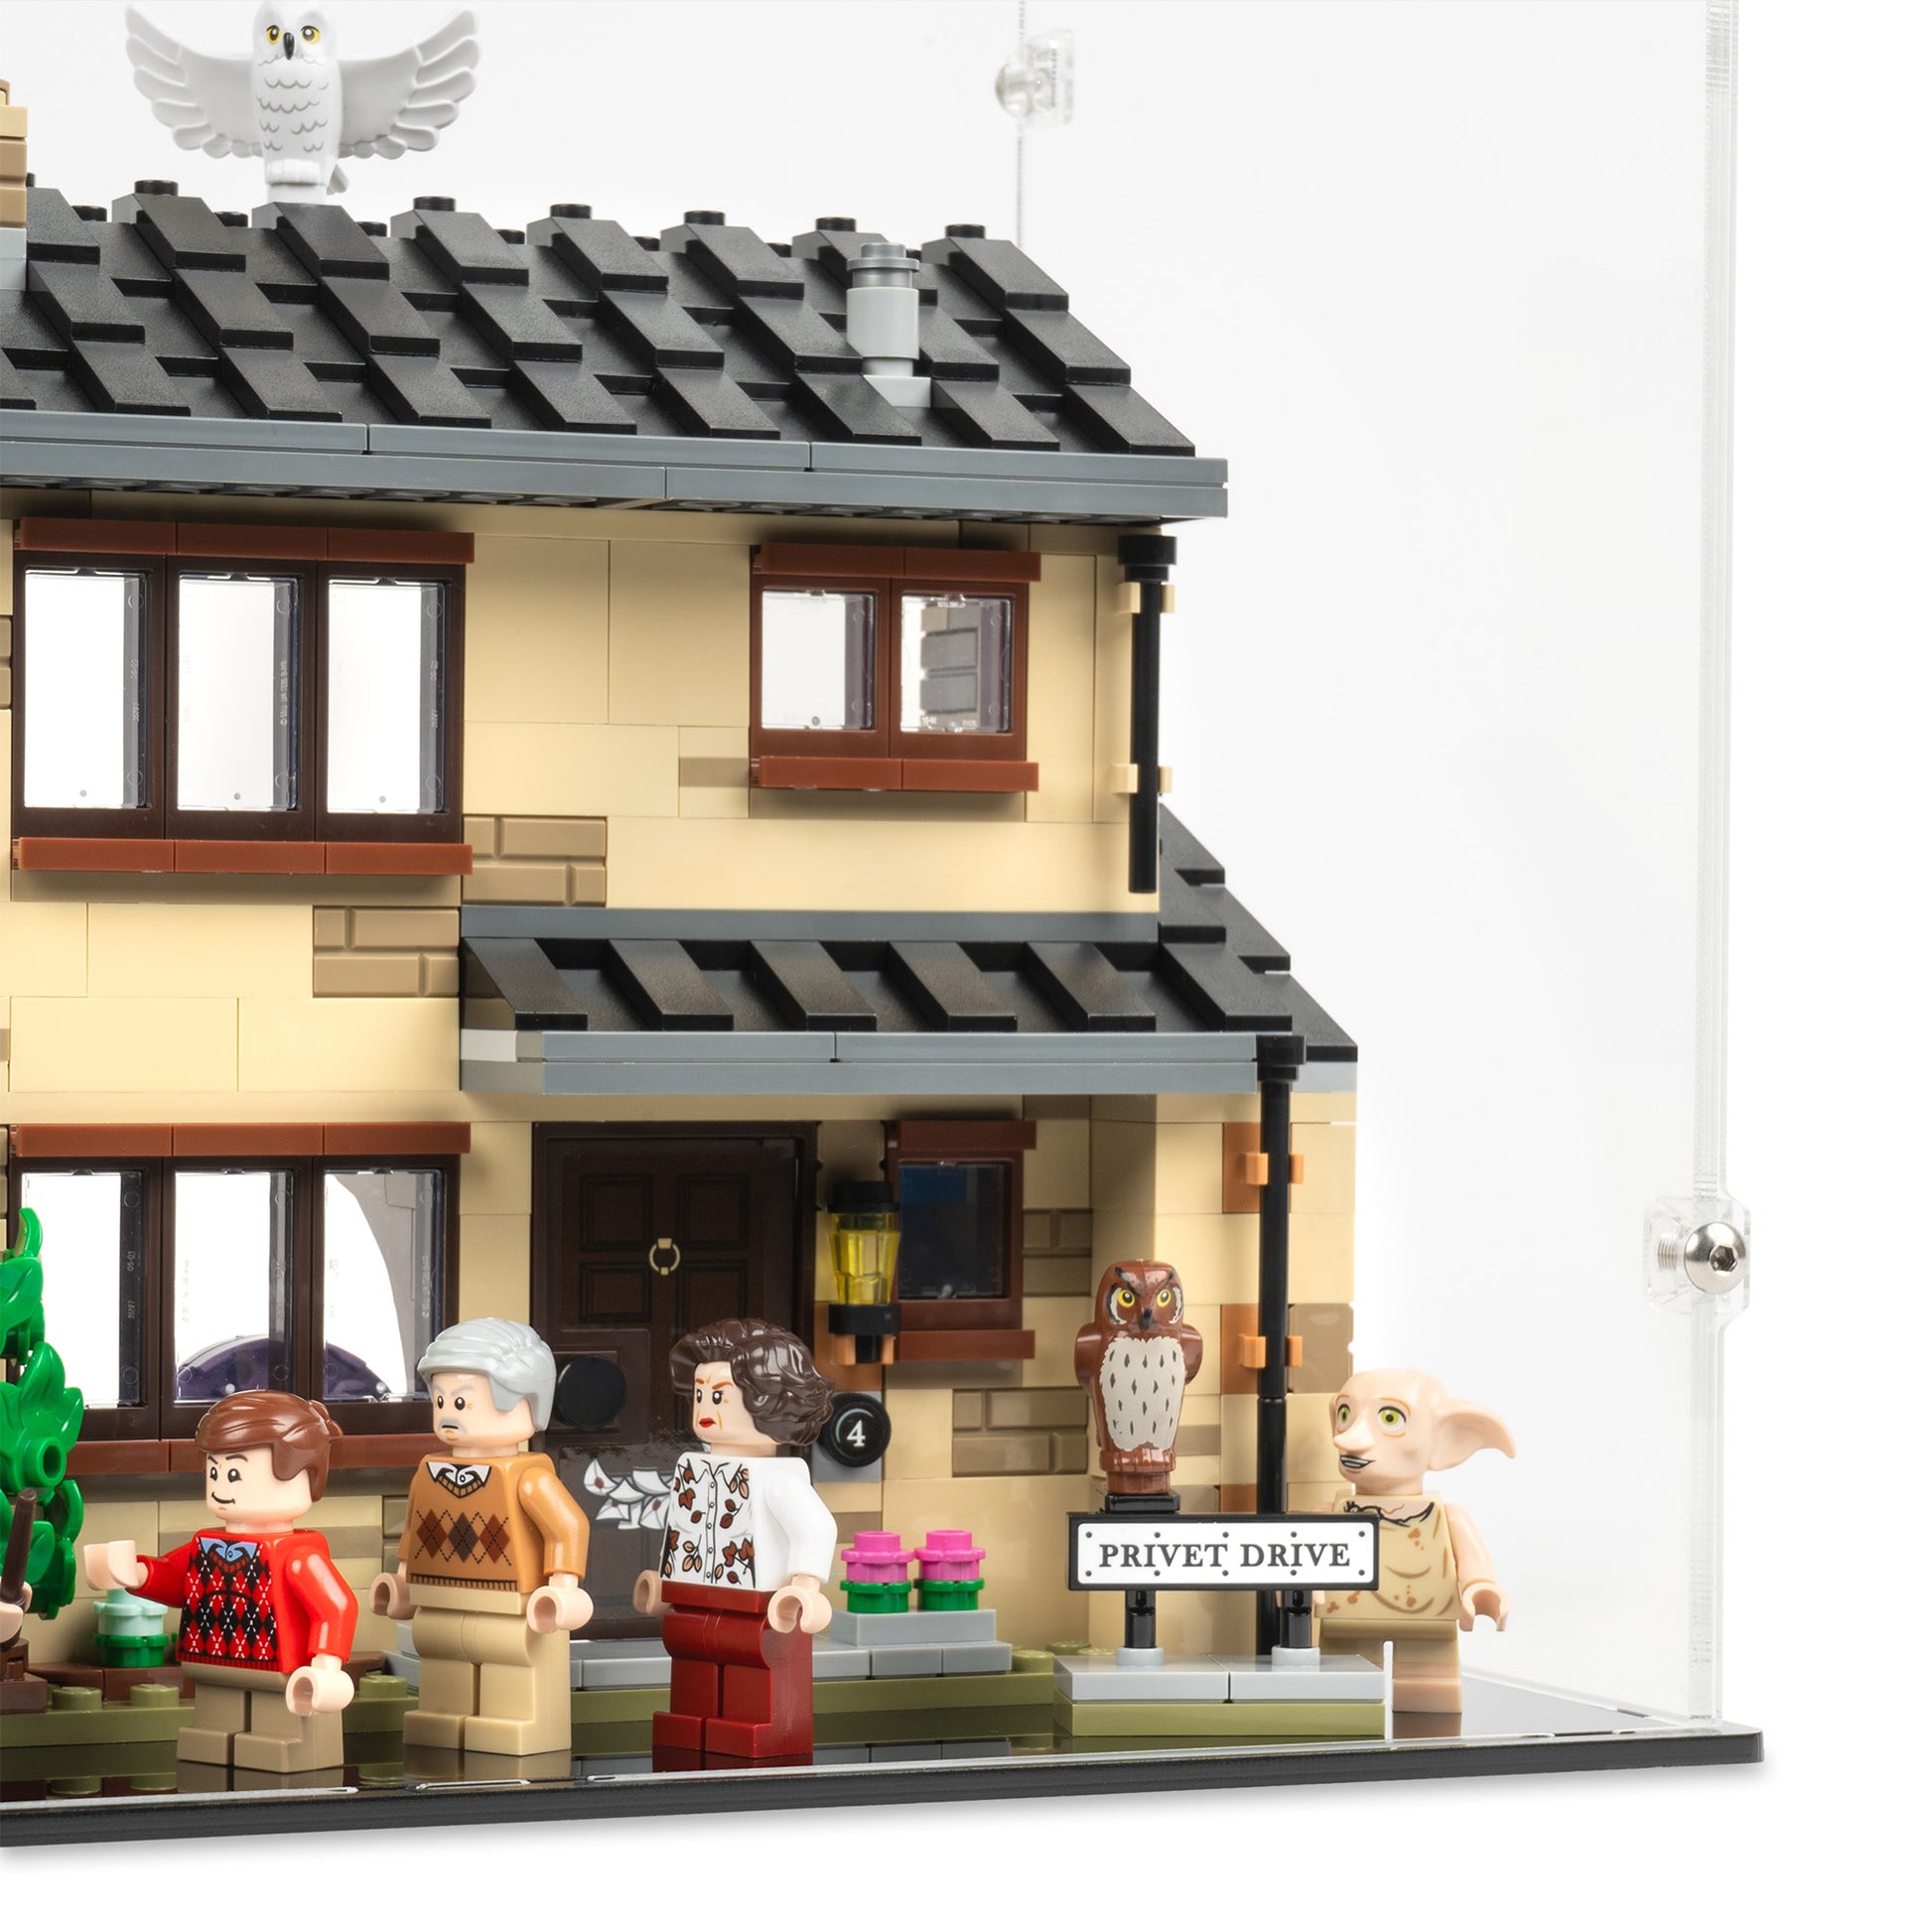 Fitting detail view of LEGO 75968 4 Privet Drive Display Case.